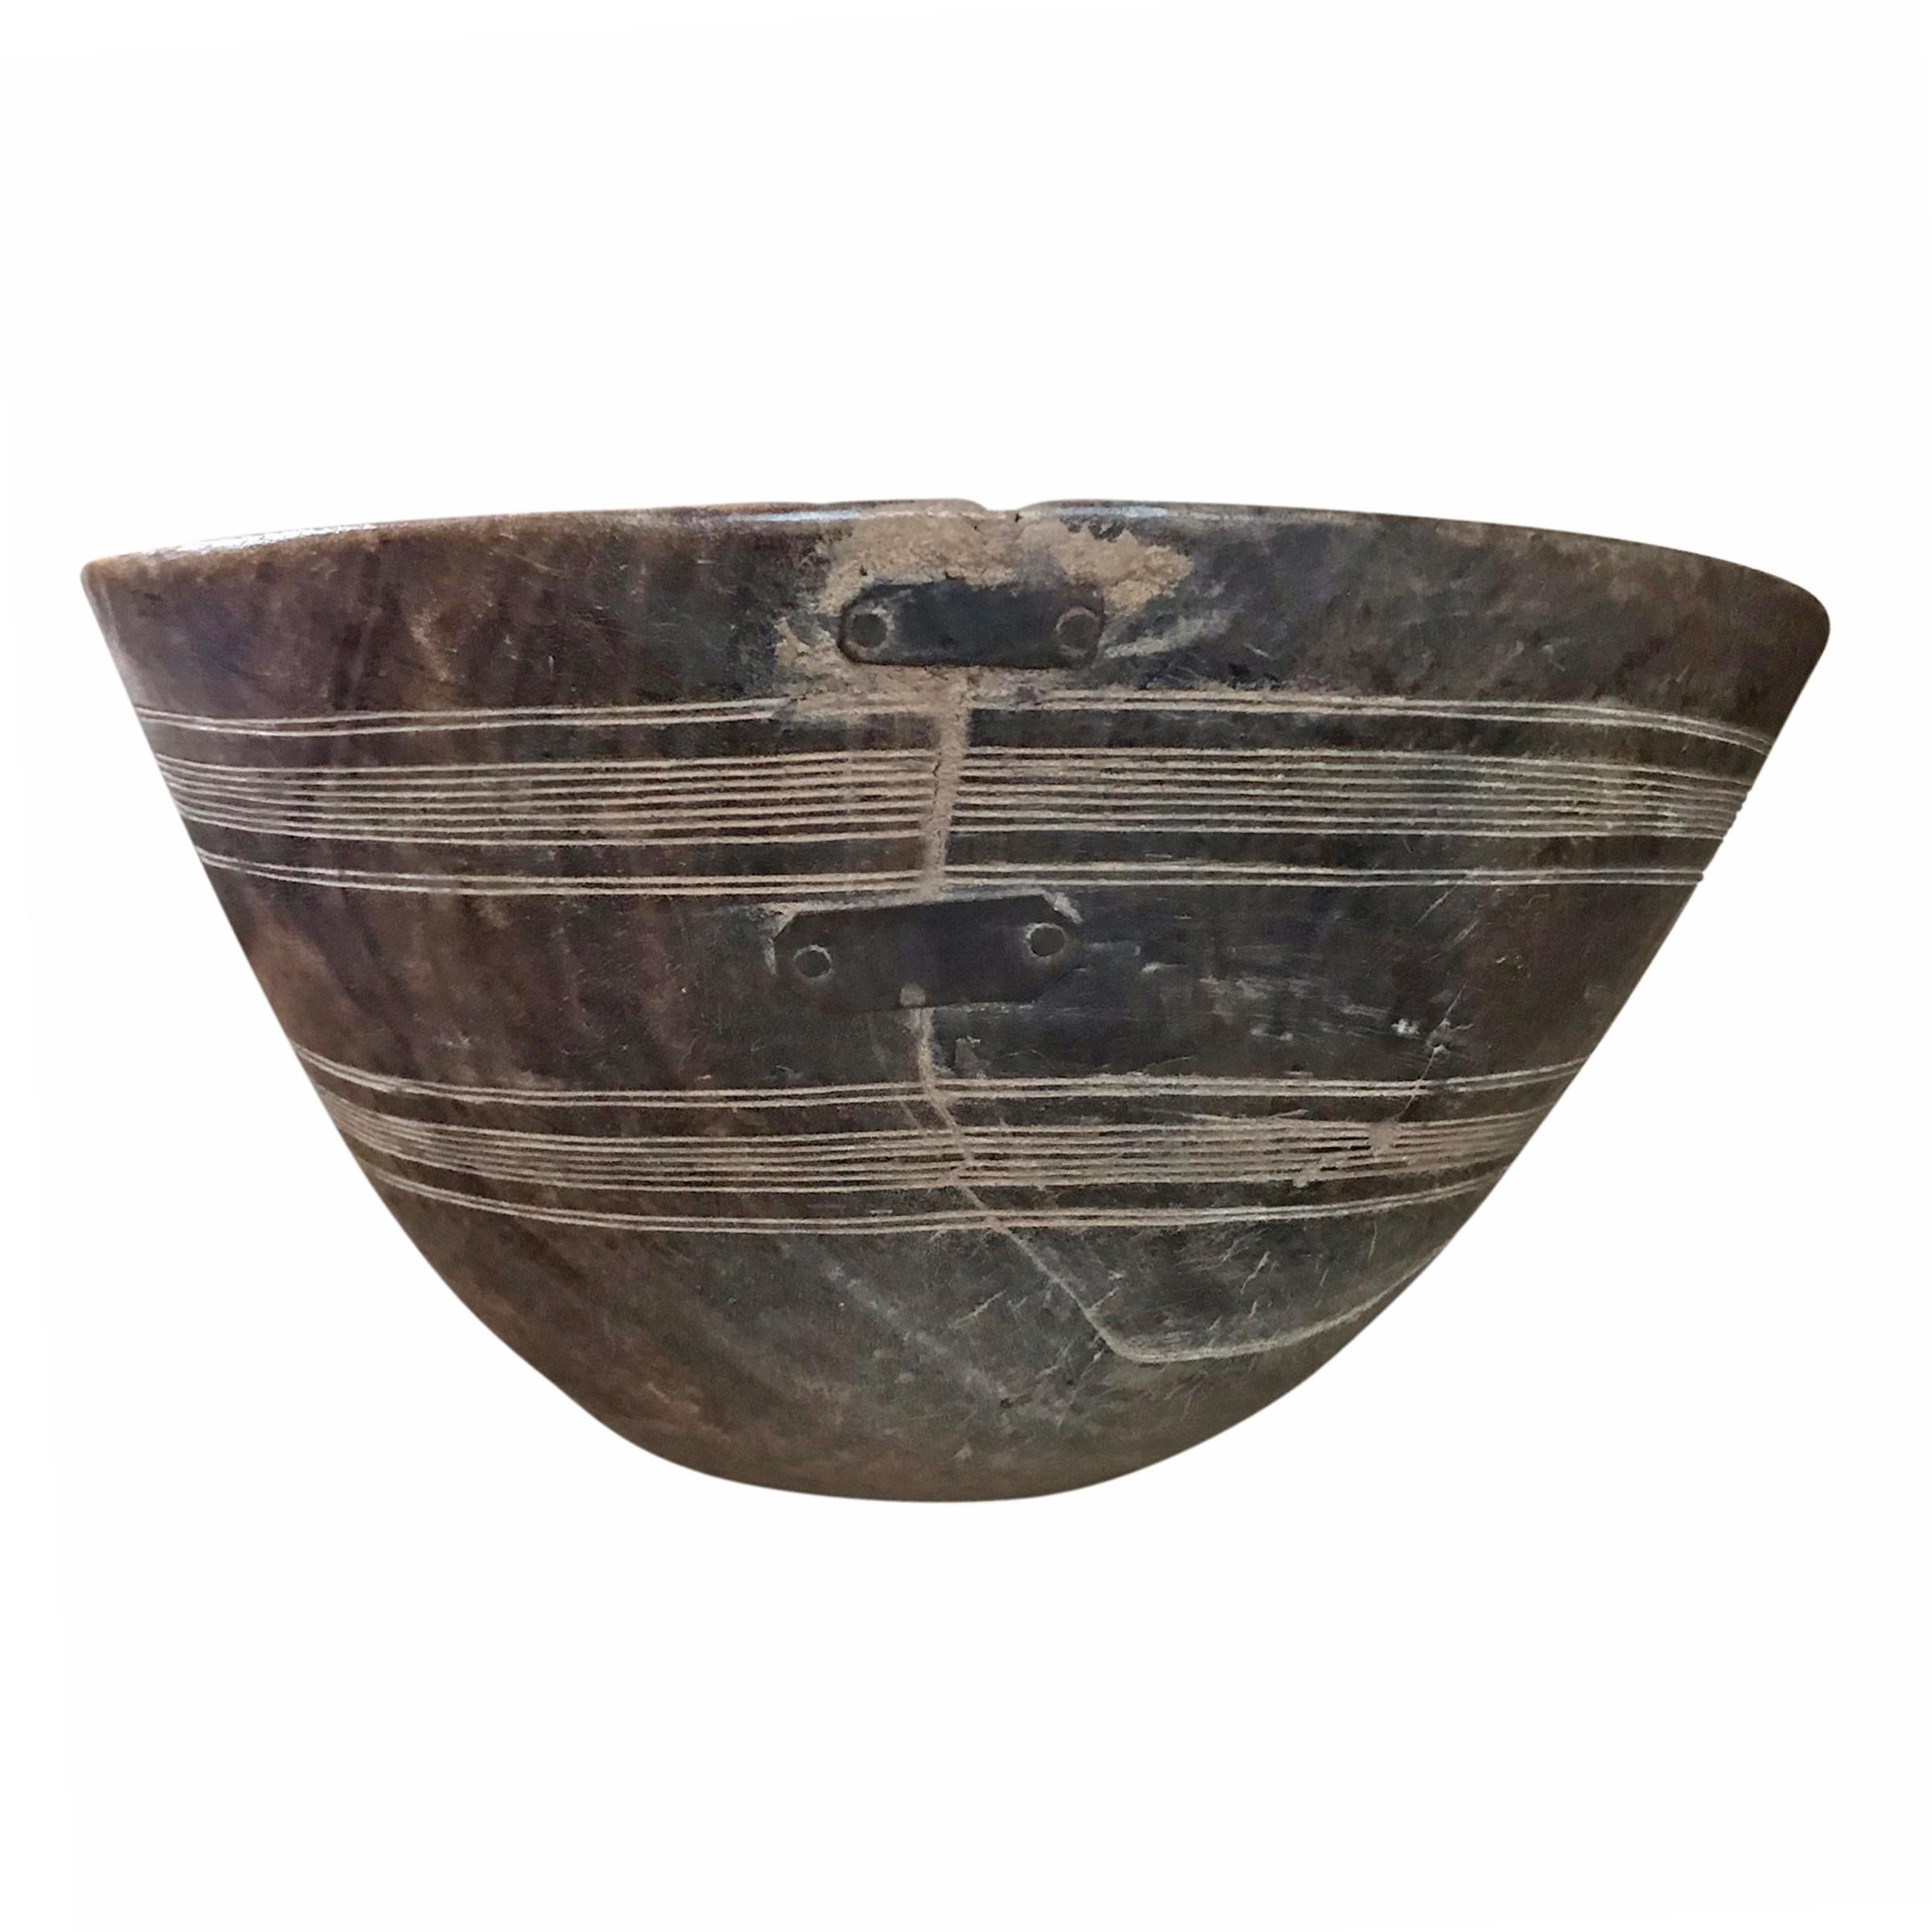 An early 20th century Tuareg bowl carved of a single piece of wood with an incised line pattern around the perimeter, with three beautifully executed repair straps. The Tuareg are nomadic pastoralists who inhabit the Saharan region of Northern